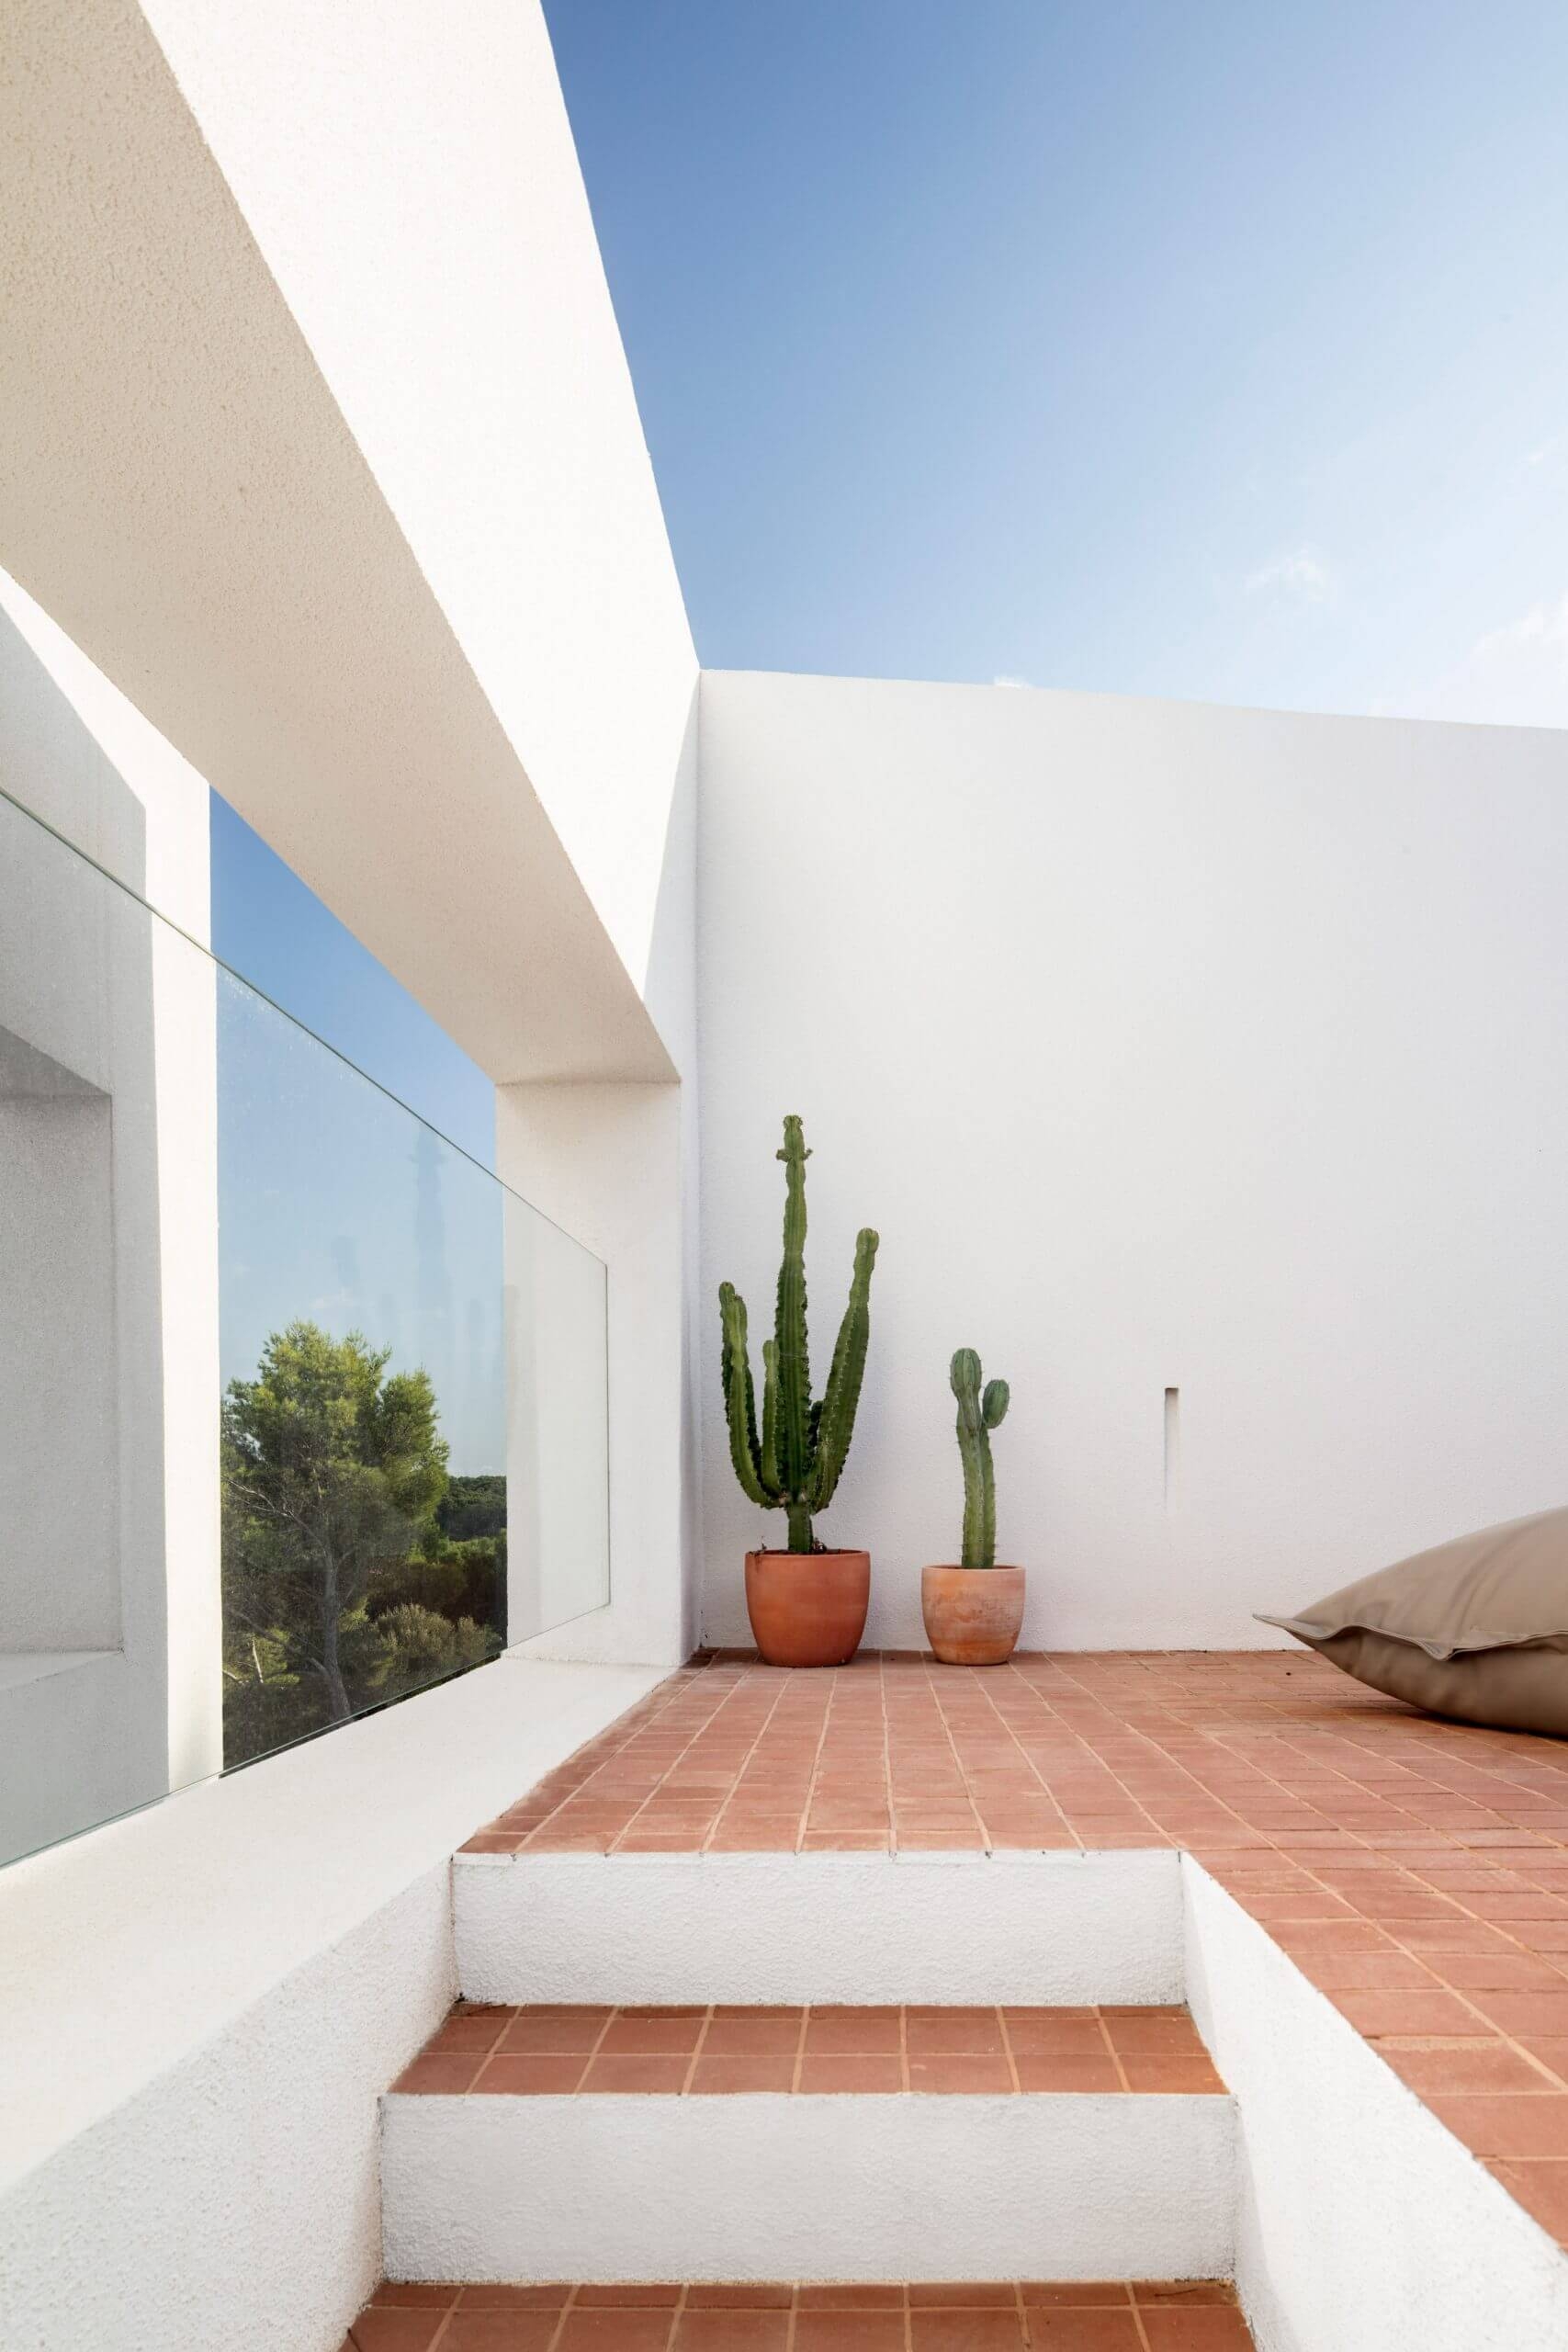 nomo studio curved house menorca spain architecture residential dezeen 2364 col 13 scaled 1